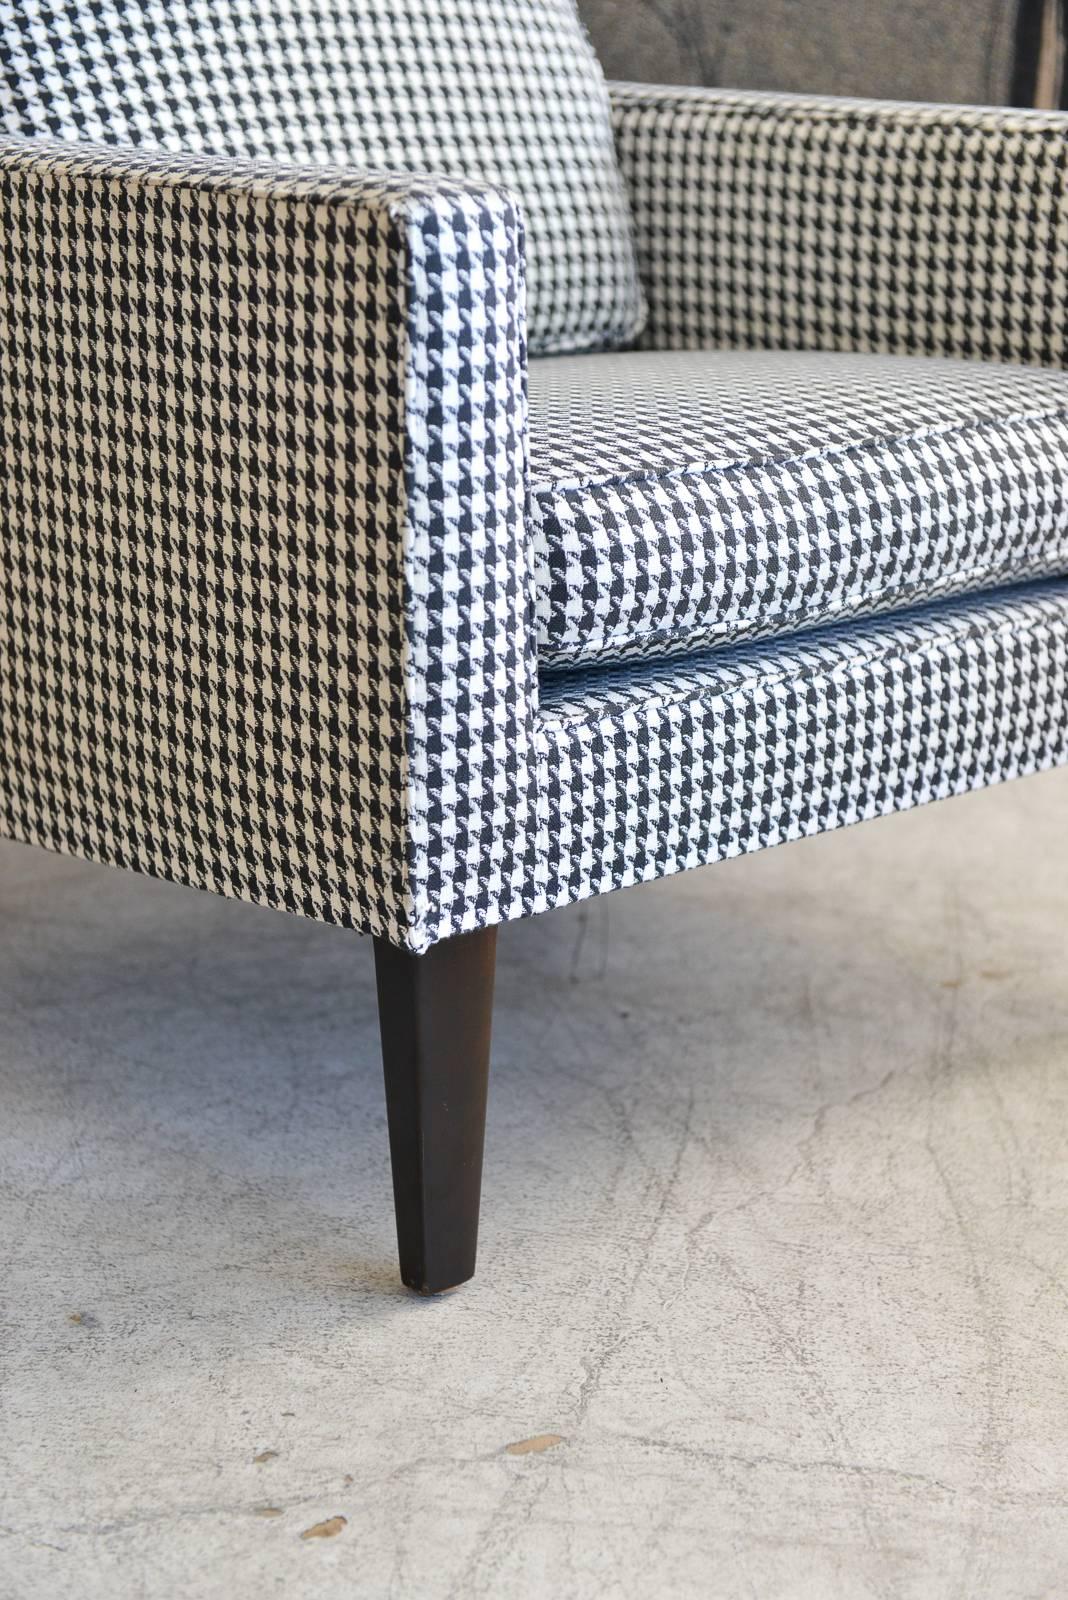 American Houndstooth Lounge Chair by Edward Wormley for Dunbar, circa 1970